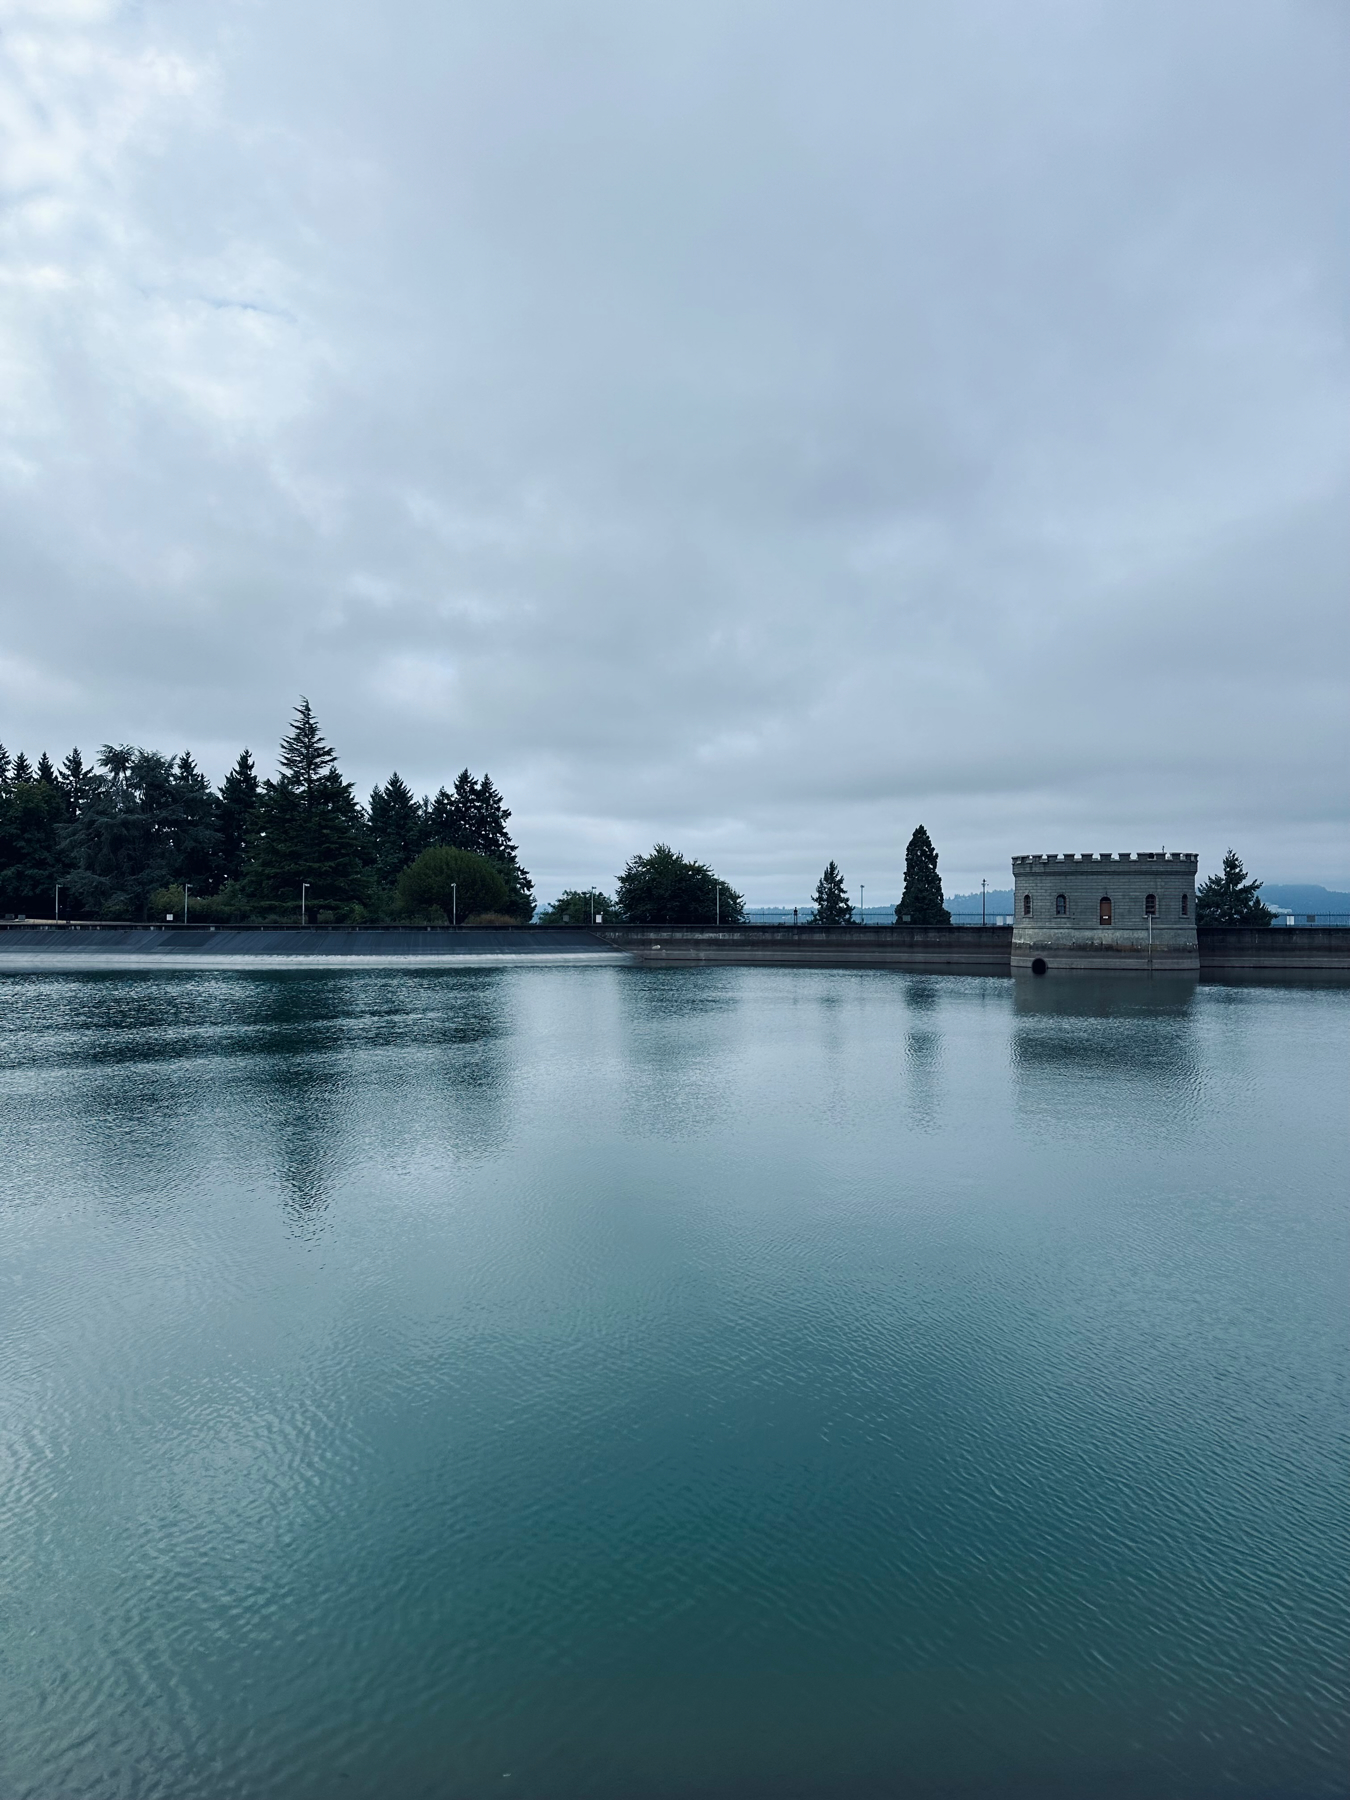 A reservoir full of water dominates the foreground and lower half. There are some structures and trees beyond. A cloudy sky dominates the background and upper half.